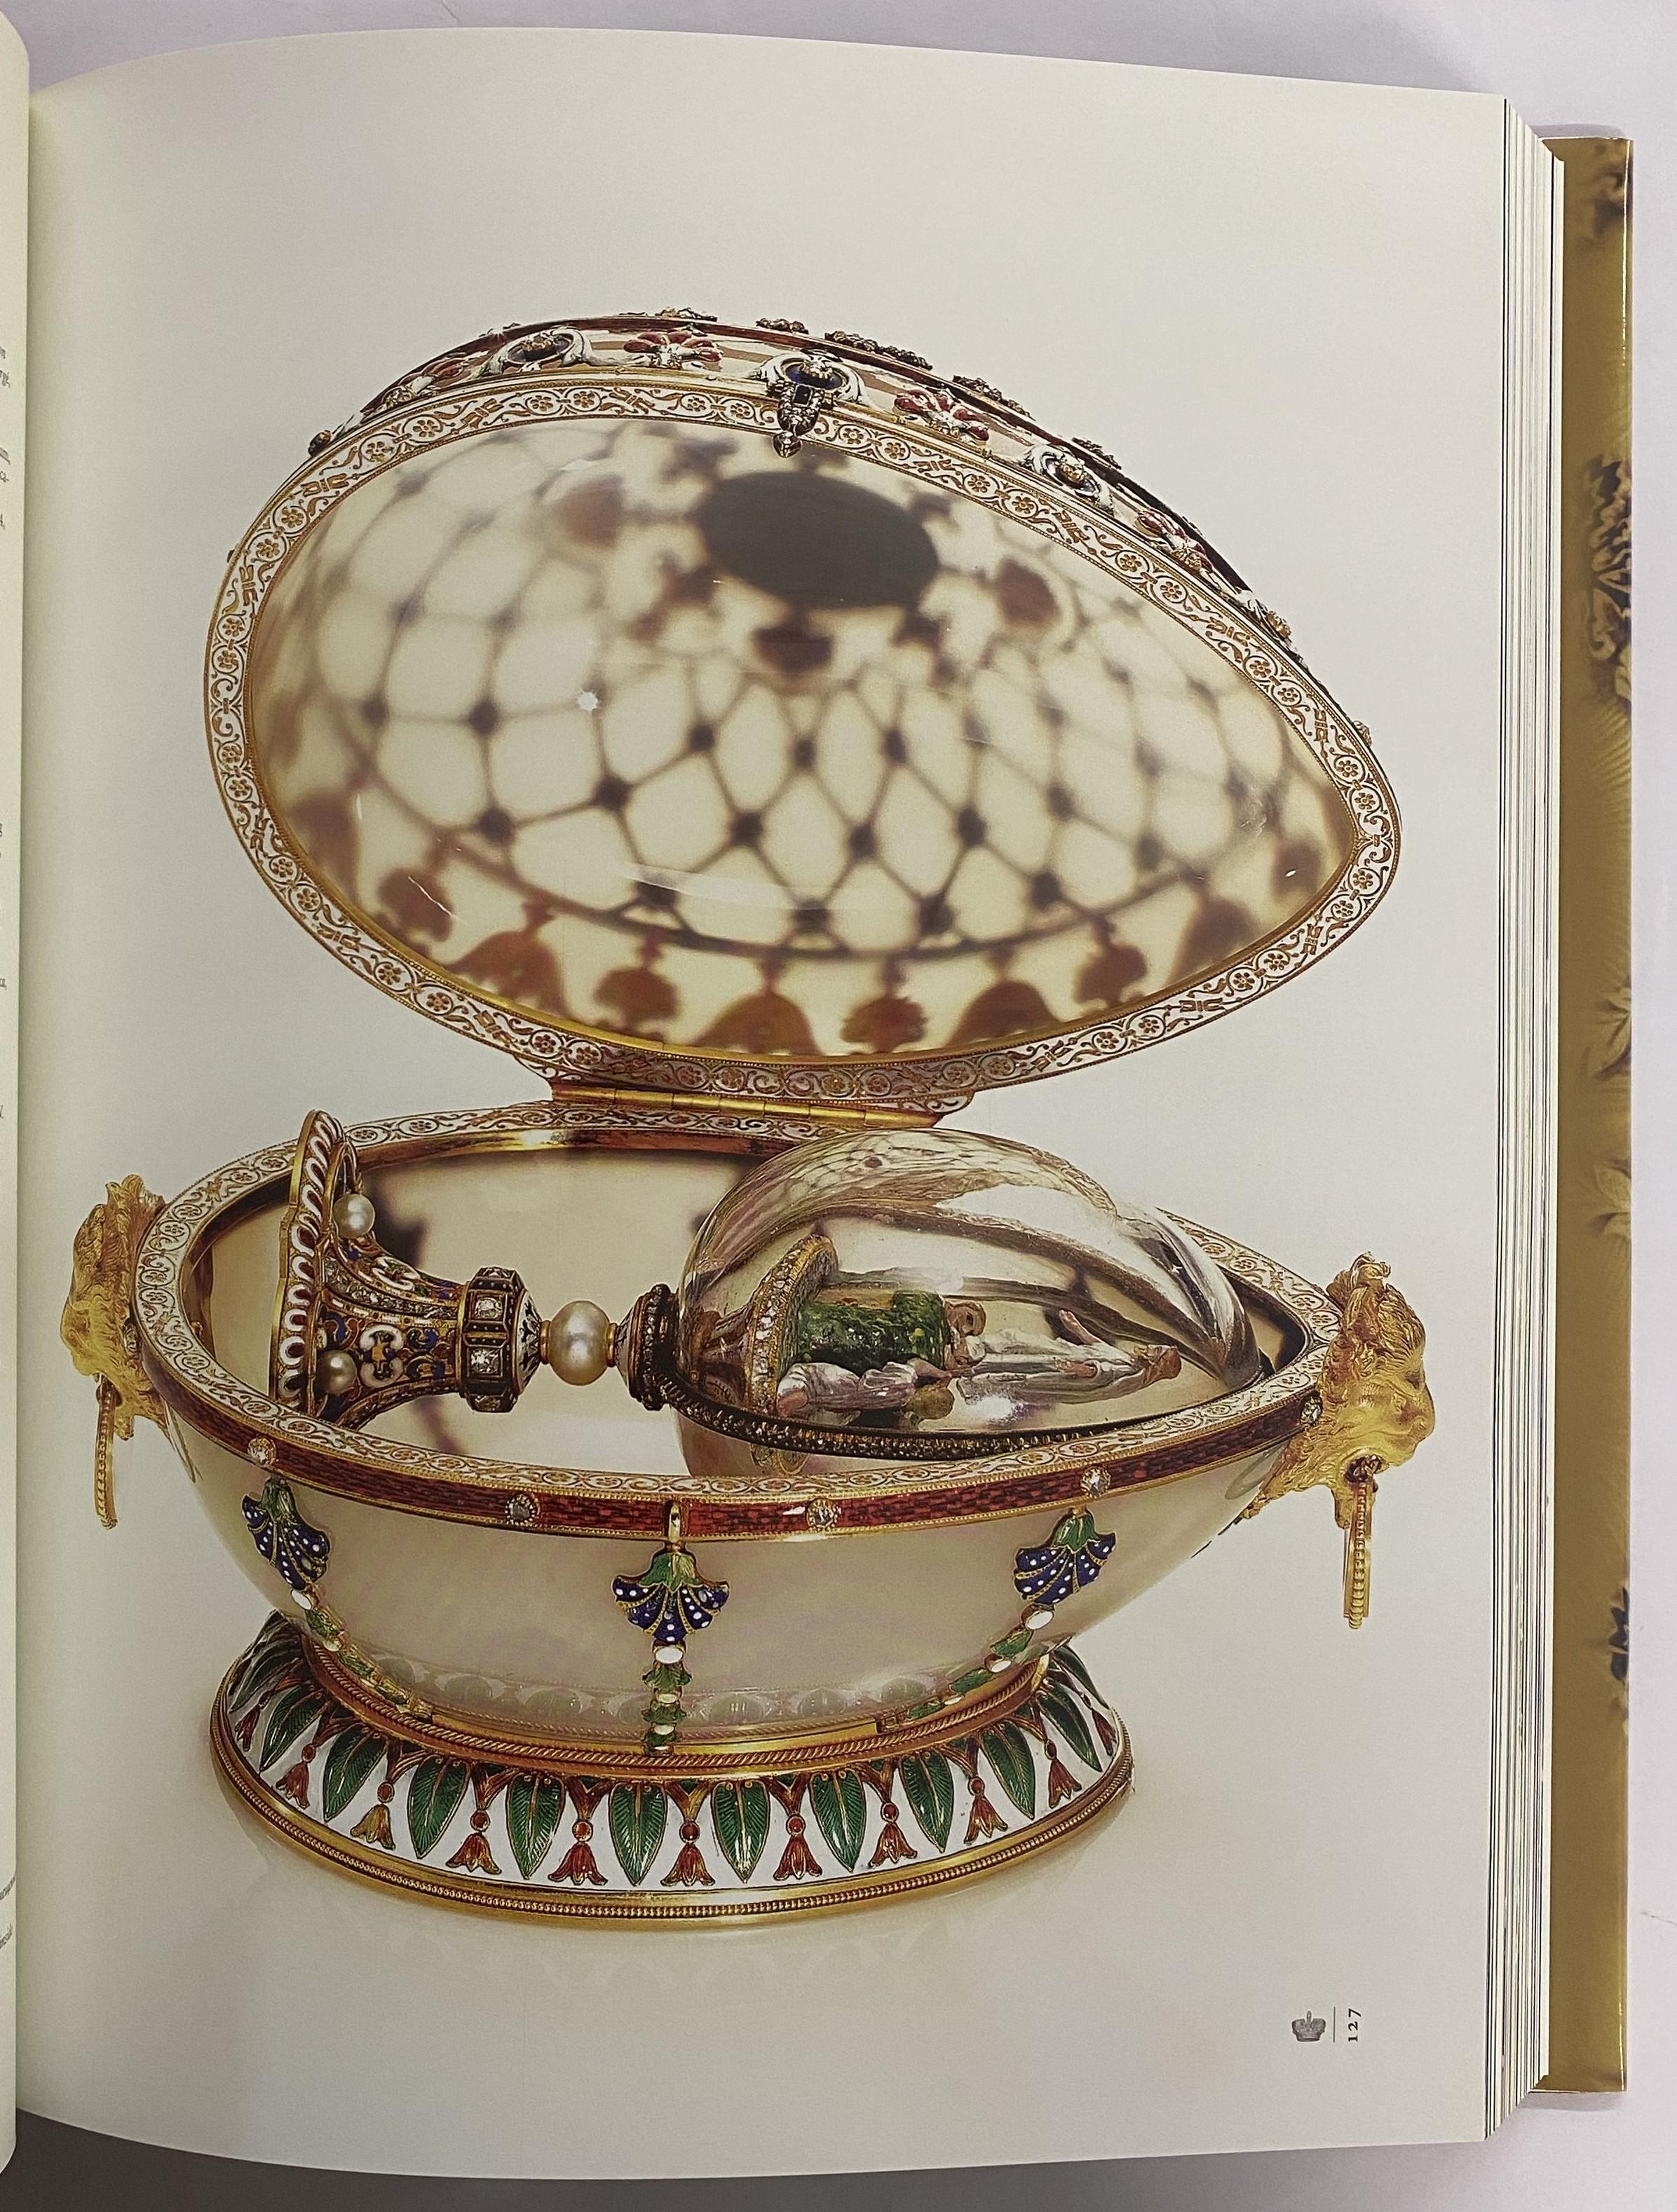 Faberge: Treasures of Imperial Russia by Geza von Habsburg (Book) For Sale 1